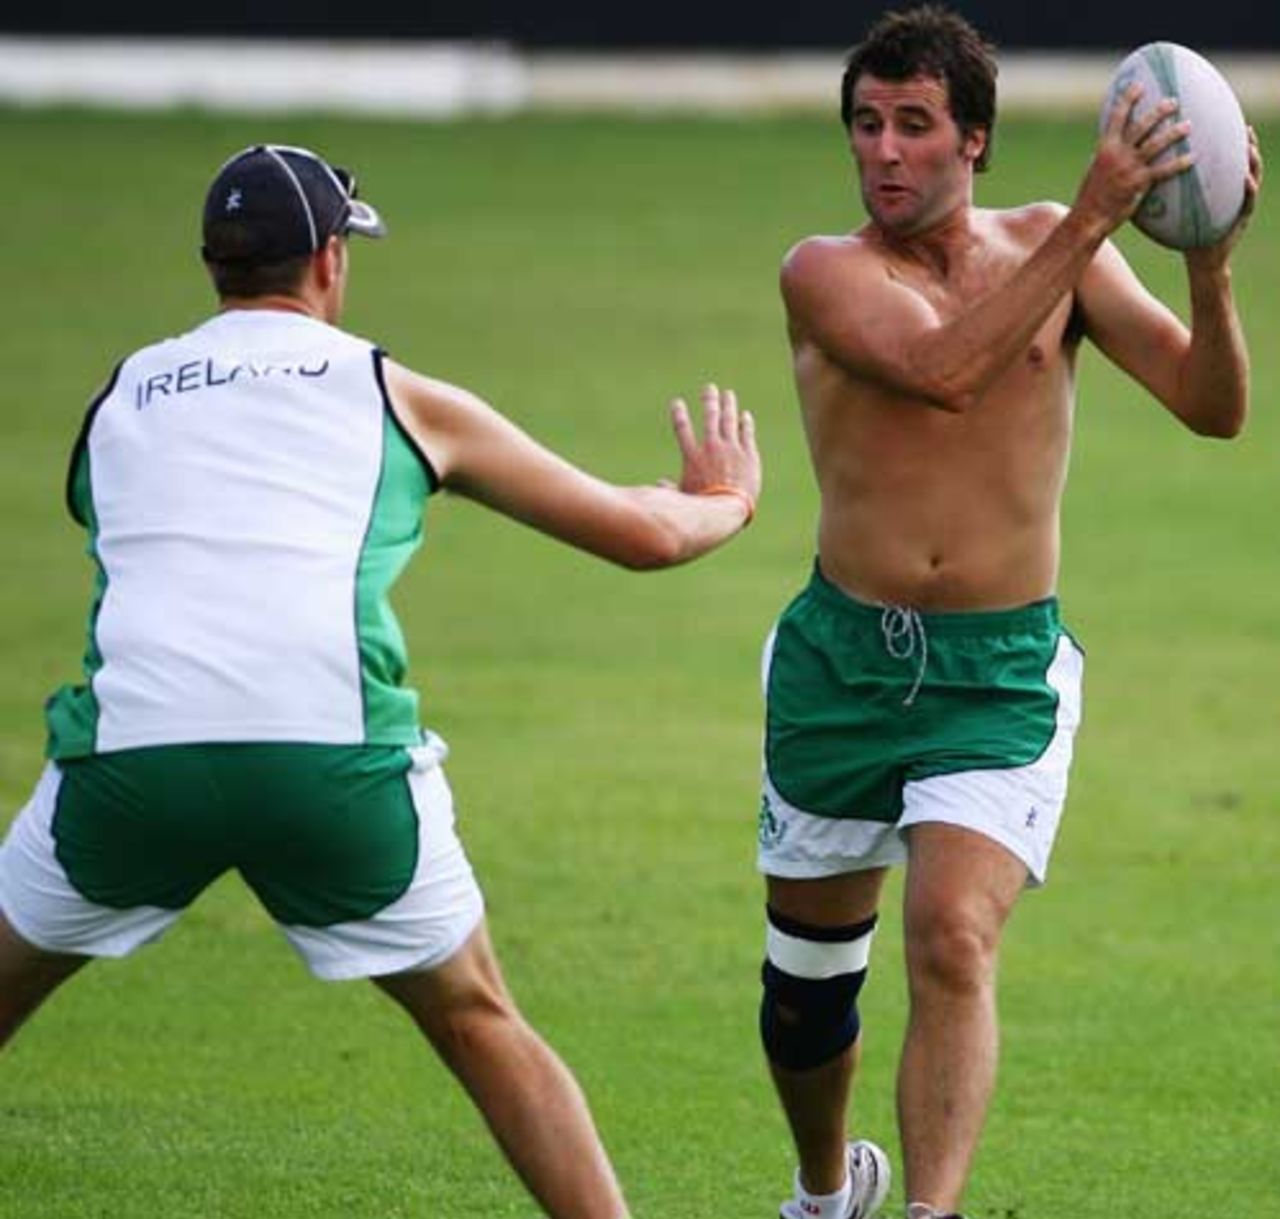 Kyle McCallan of Ireland training with a rugby ball, Guyana, March 27, 2007